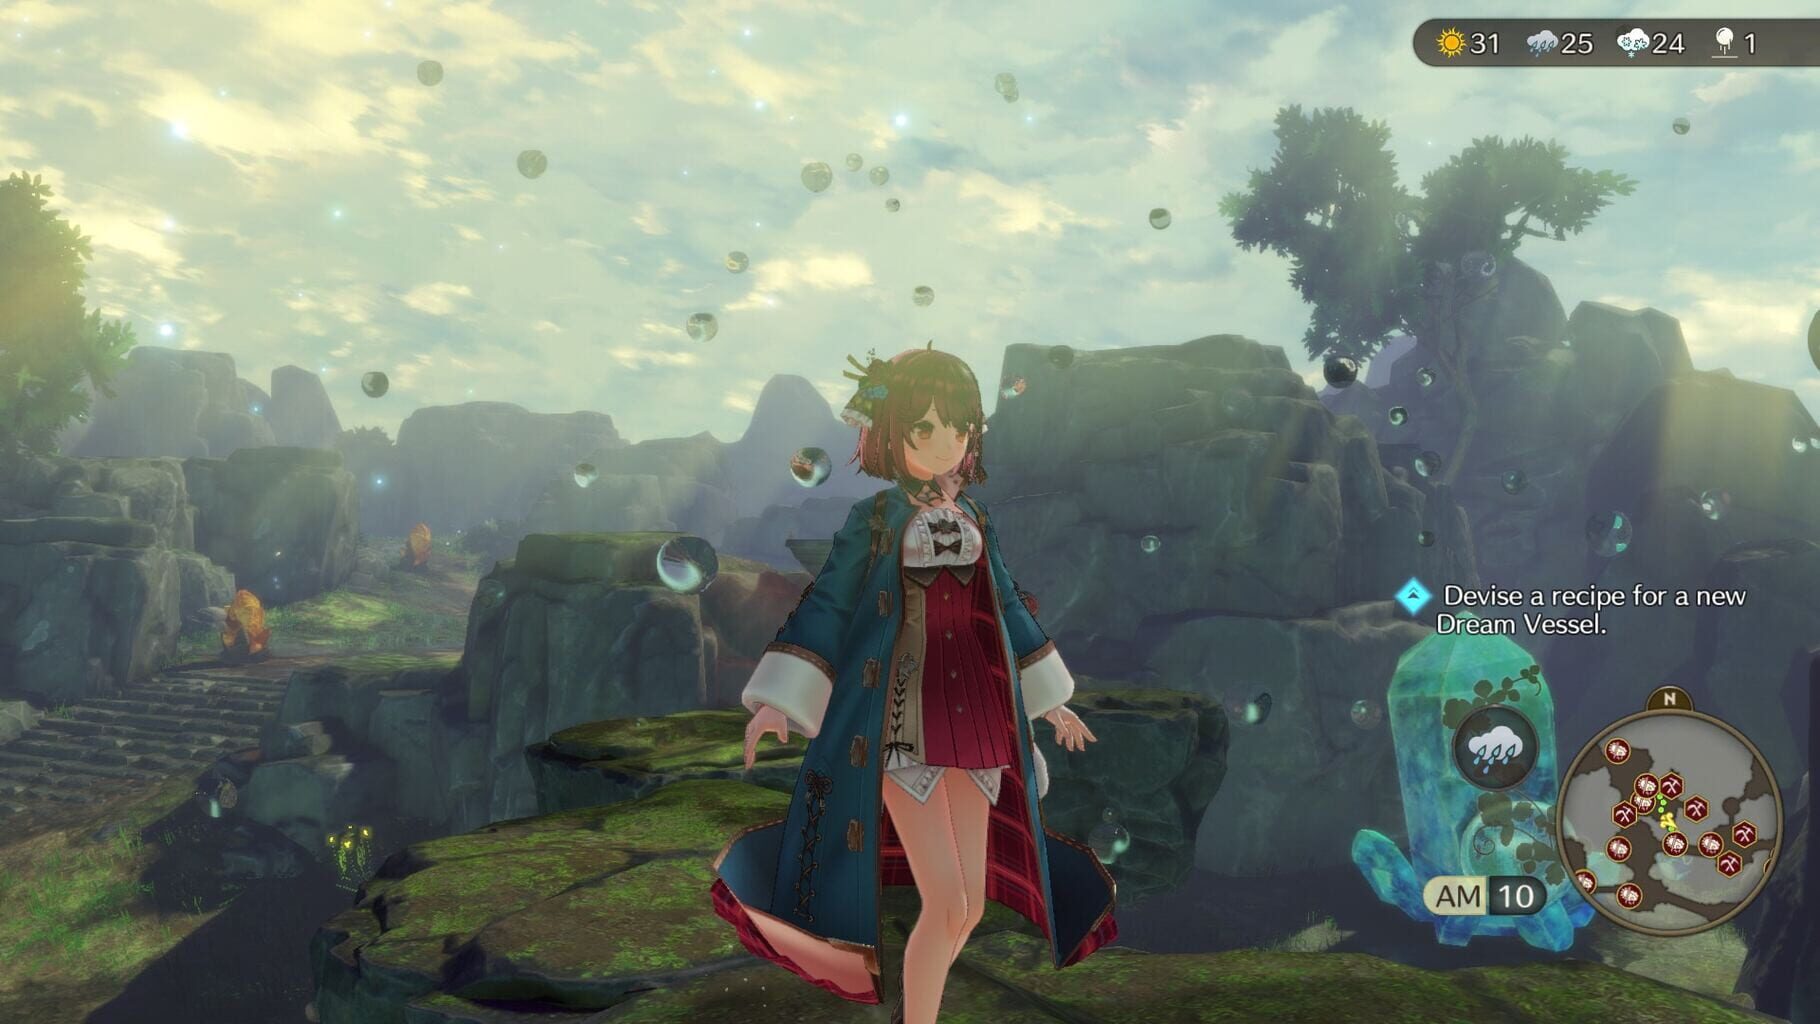 Atelier Sophie 2: The Alchemist of the Mysterious Dream - Limited Edition screenshot